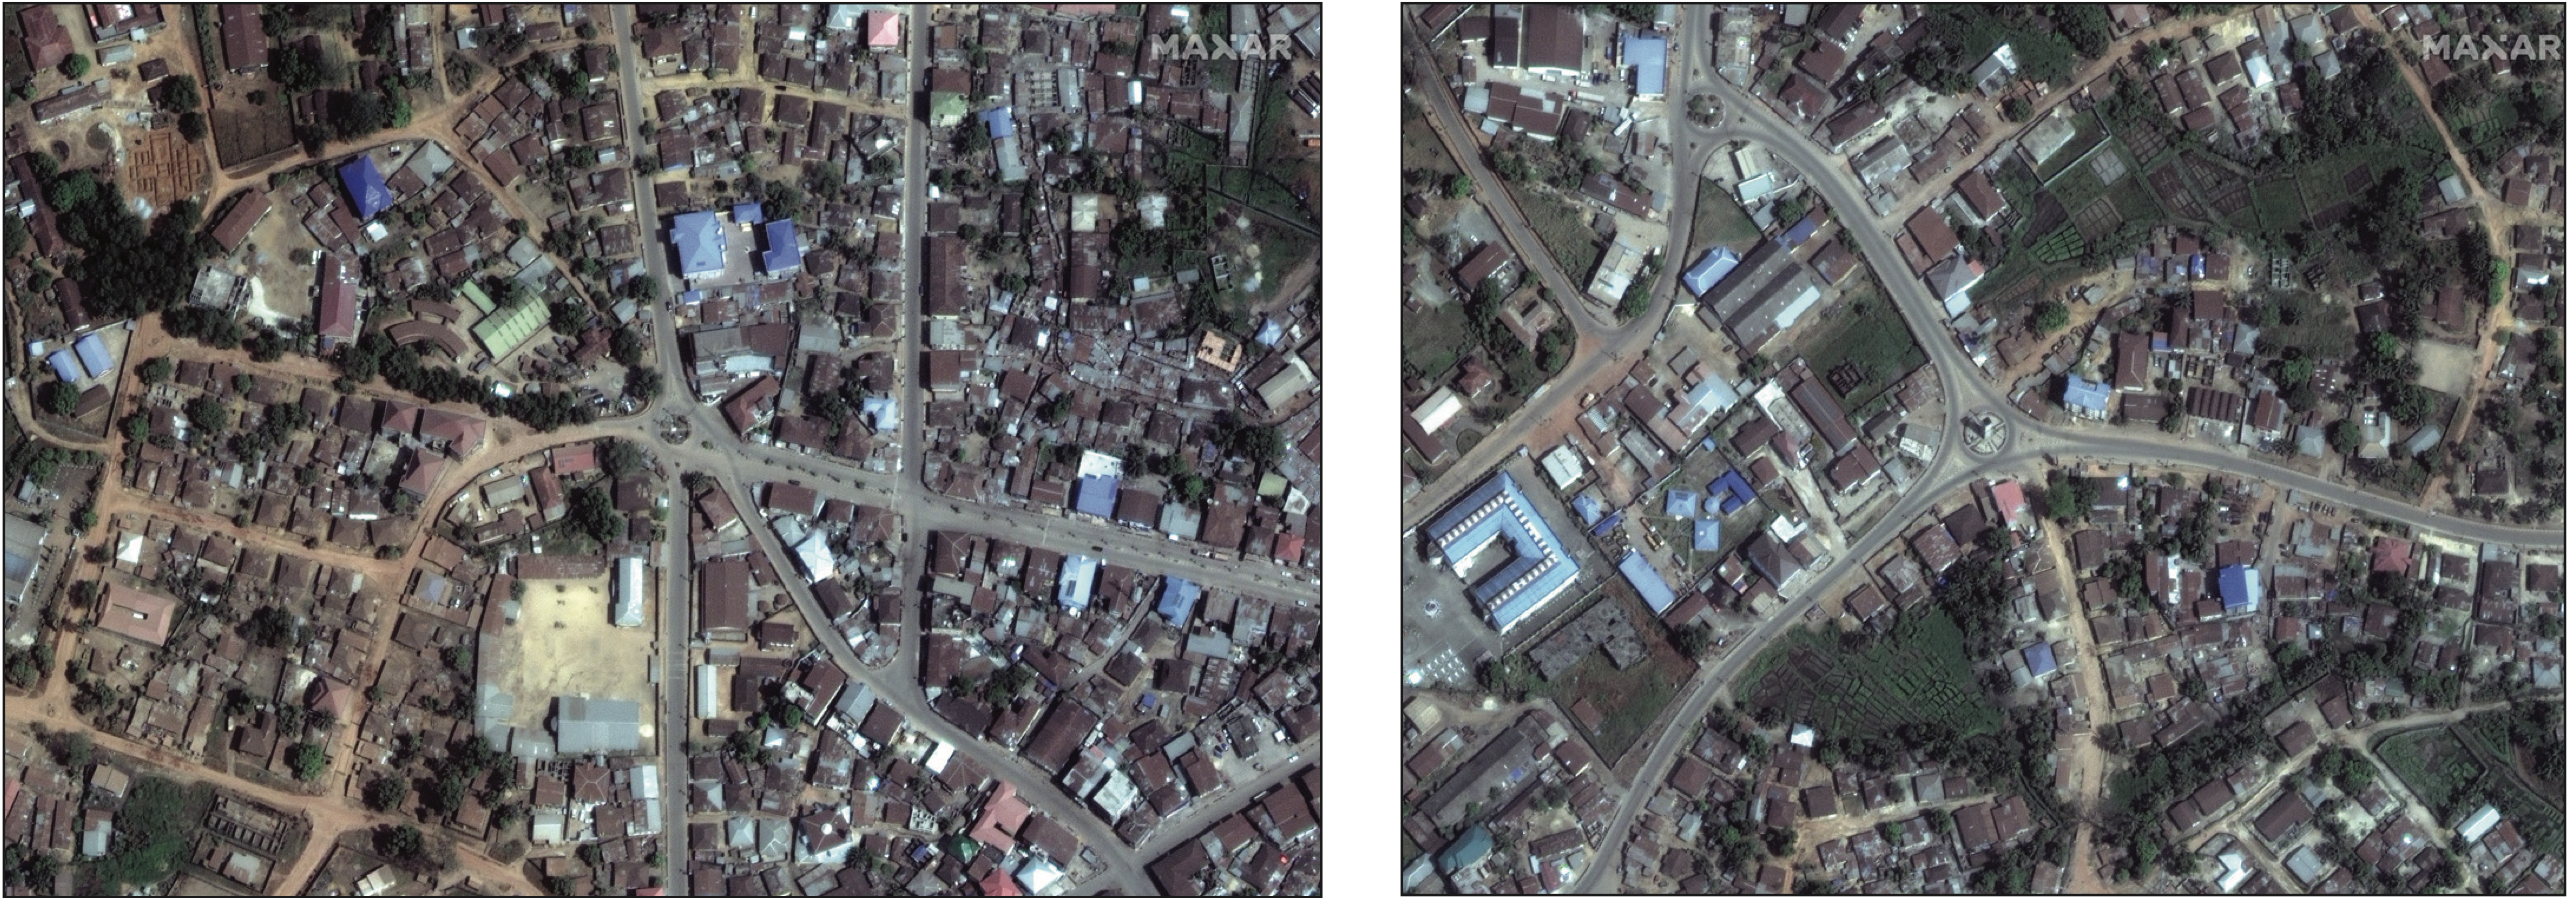 Maxar’s GeoEye-1 satellite captured these images of Bo, Sierra Leone on Jan. 4, 2020. The image on the left shows the town’s Clock Tower in the middle of the roundabout.